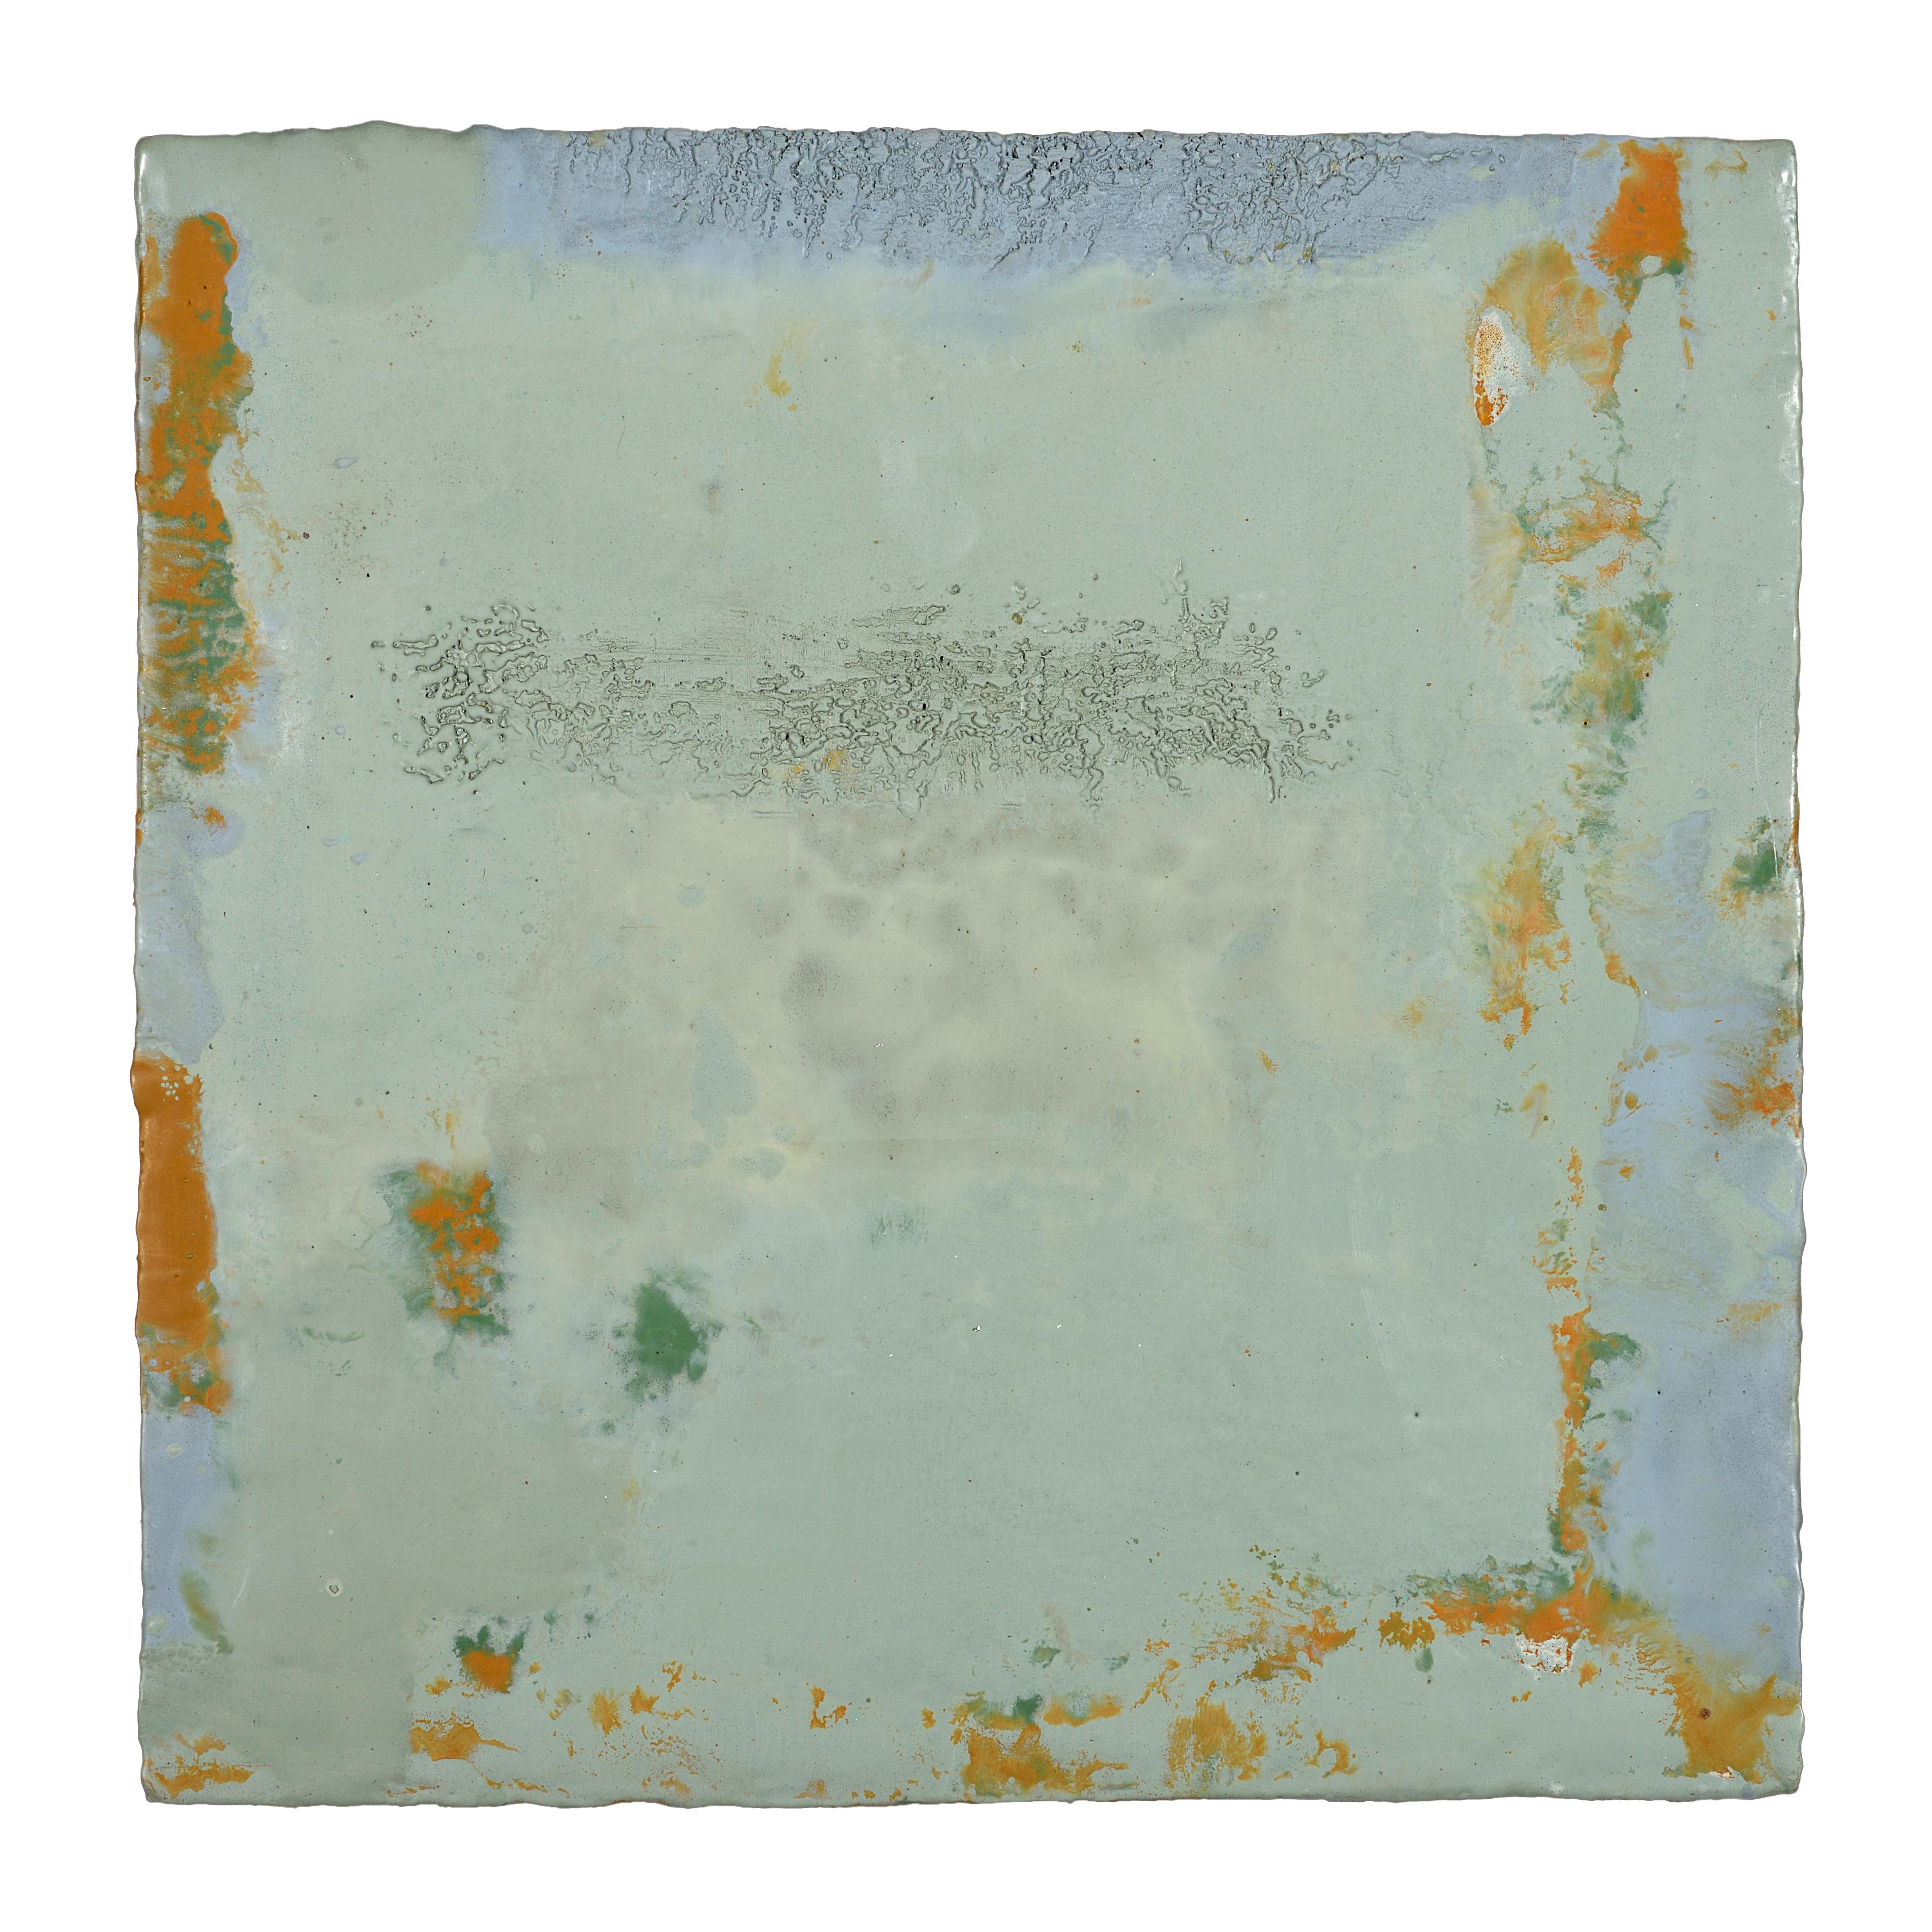 Contemporary Richard Hirsch Encaustic Painting of Nothing #75, 2021 For Sale